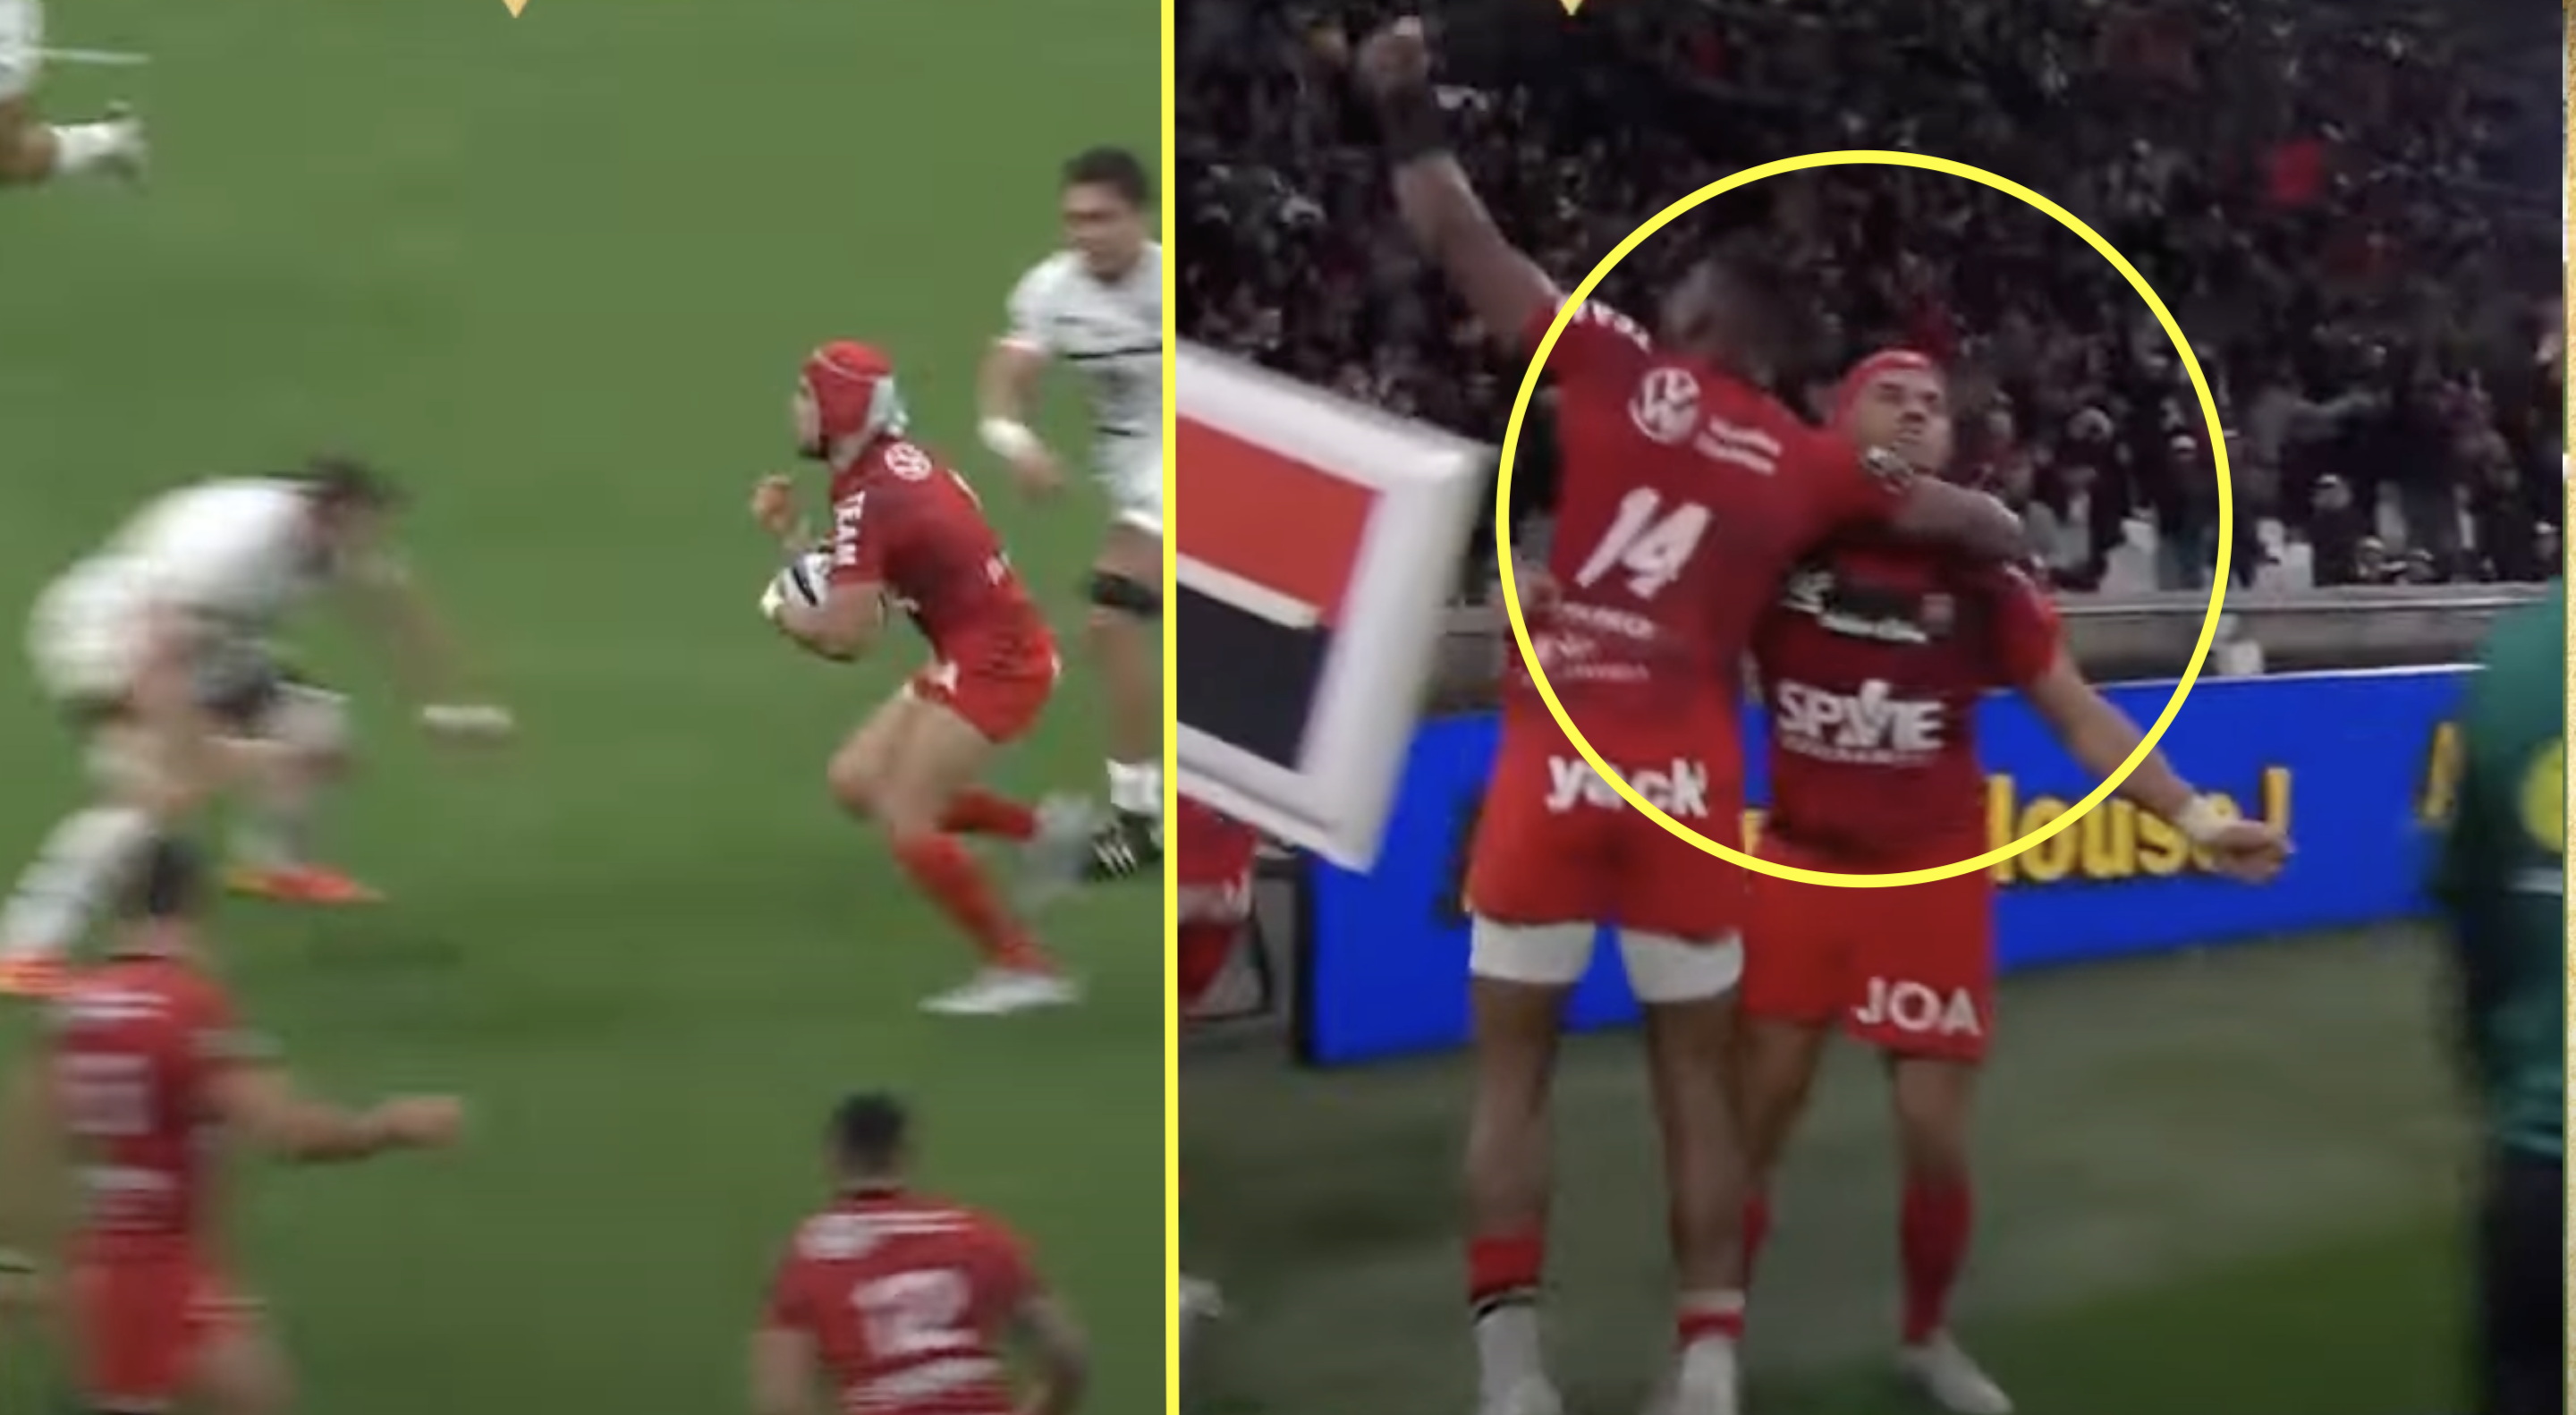 The match Villiere eclipsed teammate Kolbe as the best player at Toulon